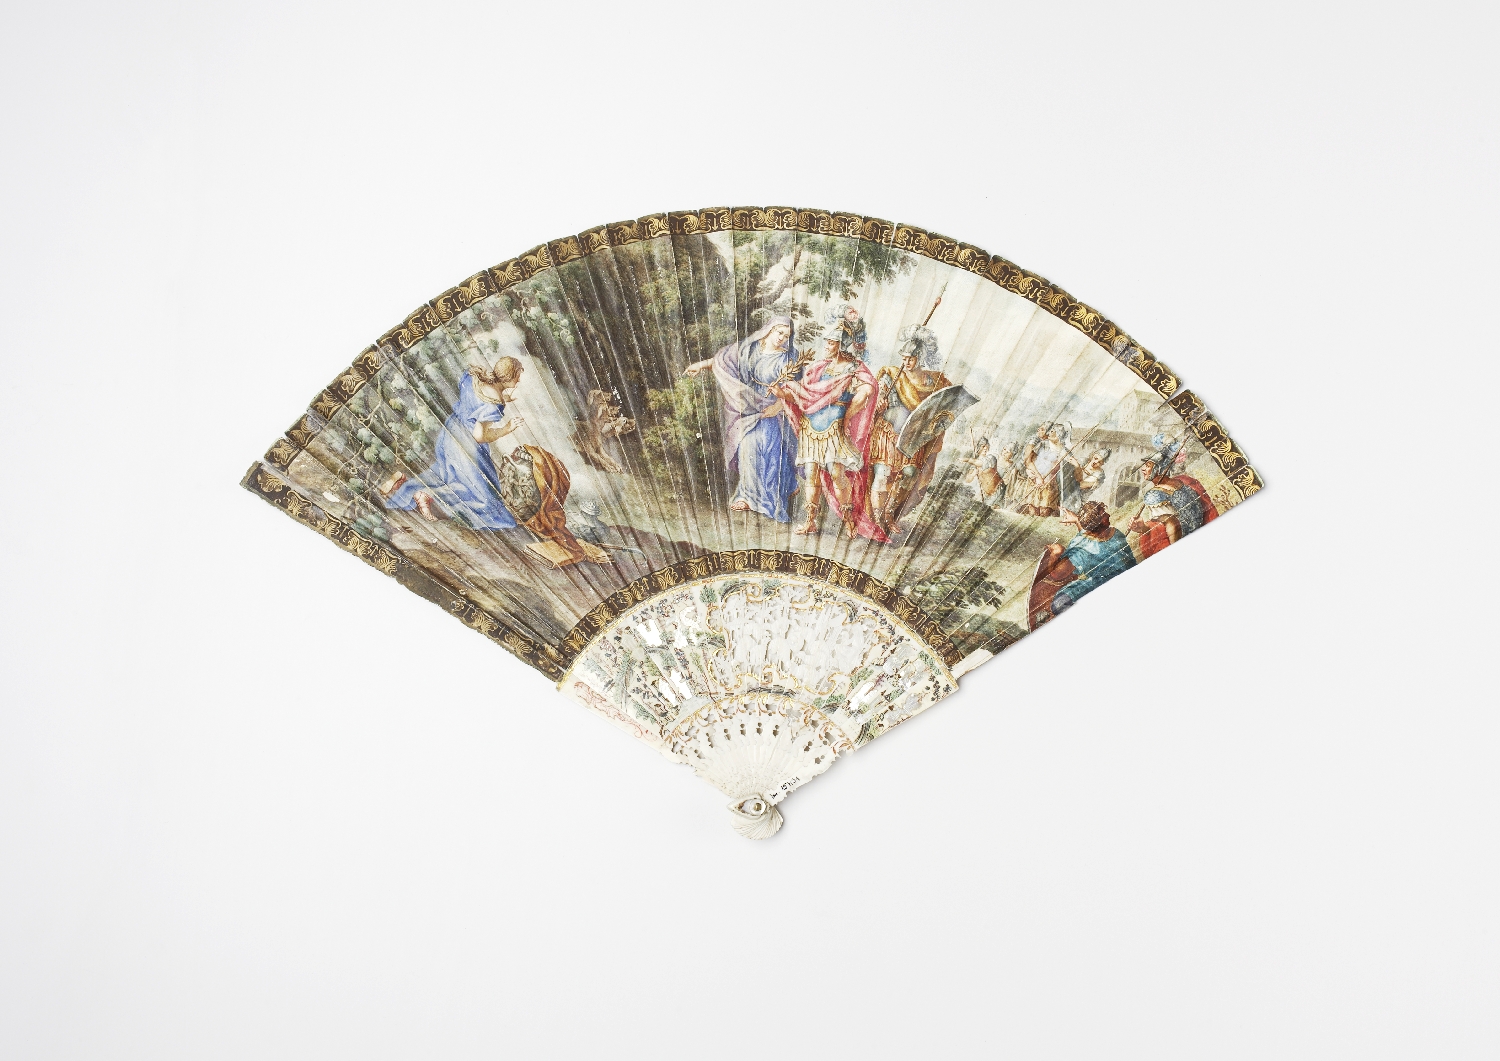 Fan with mythological motif, France or Italy, 2nd half 18th c., parchment, painted, ivory, inv. no. 157-31